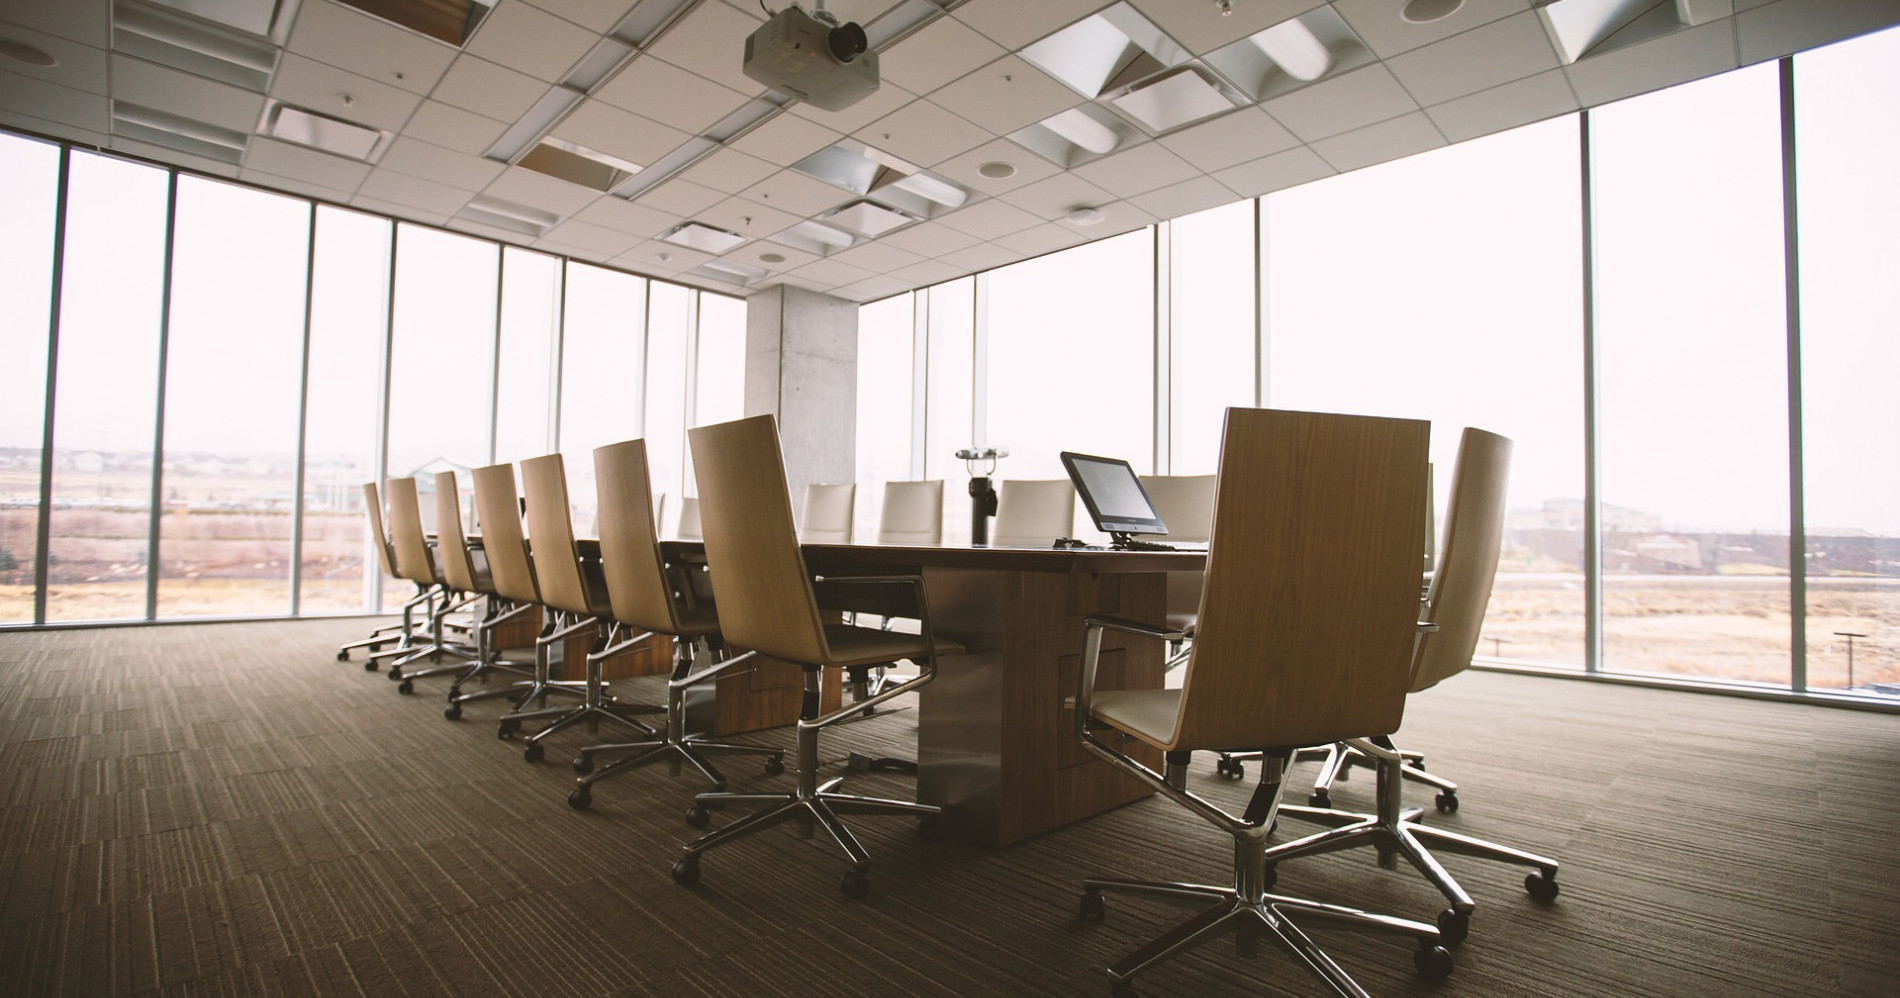 Conference Room (Sumber gambar: Image by Free-Photos from Pixabay)